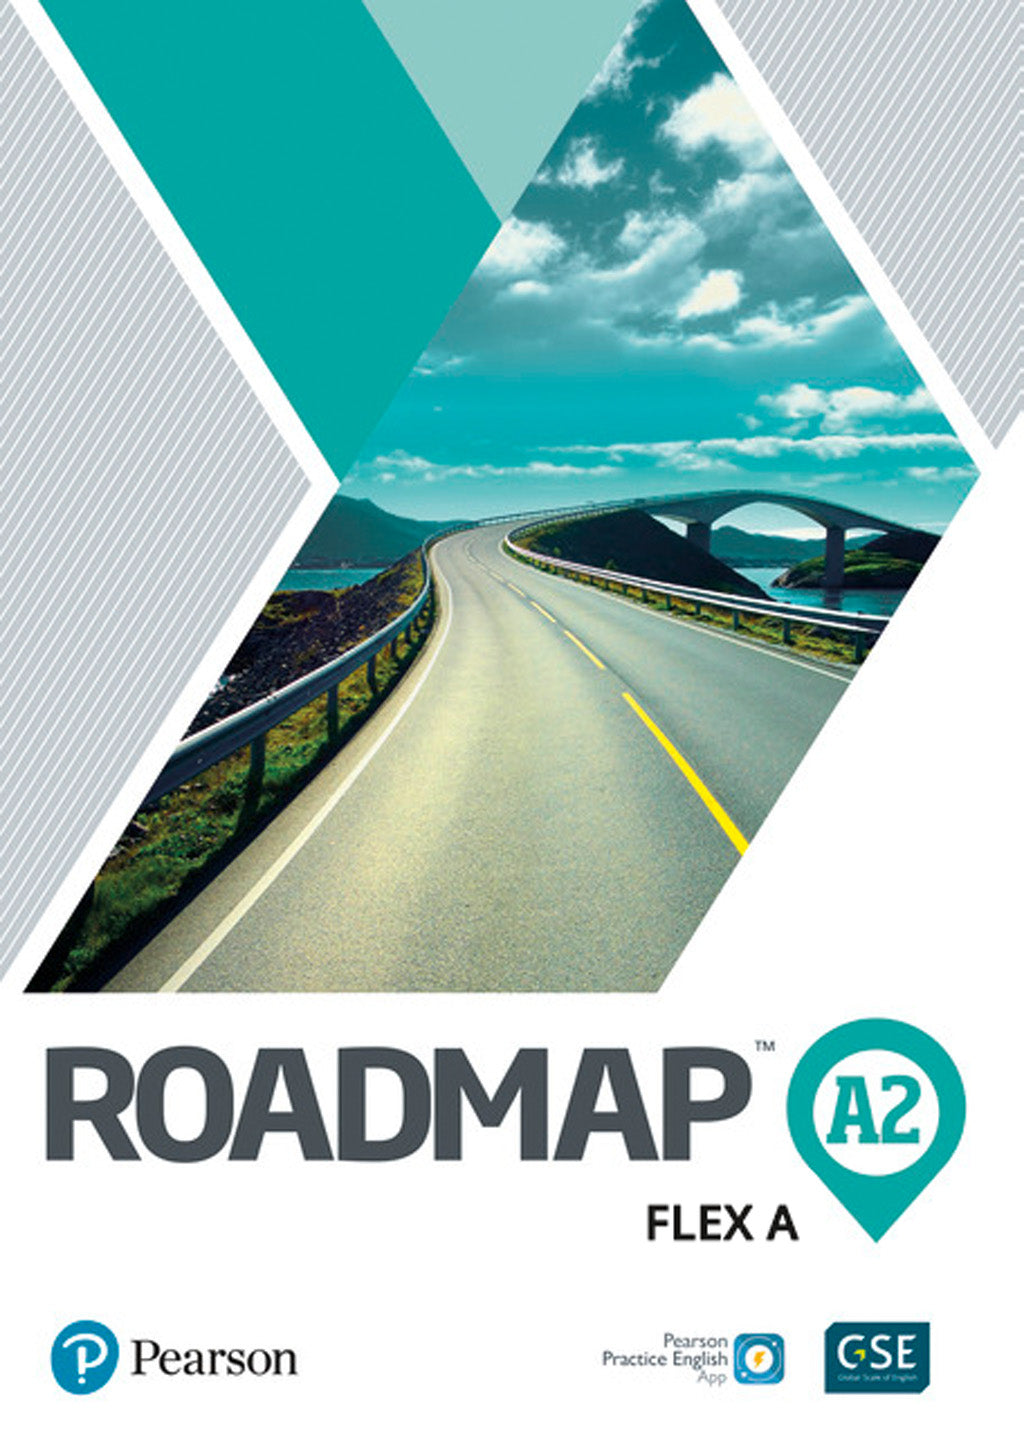 RoadMap A2 Flex A eBook with Online Practice